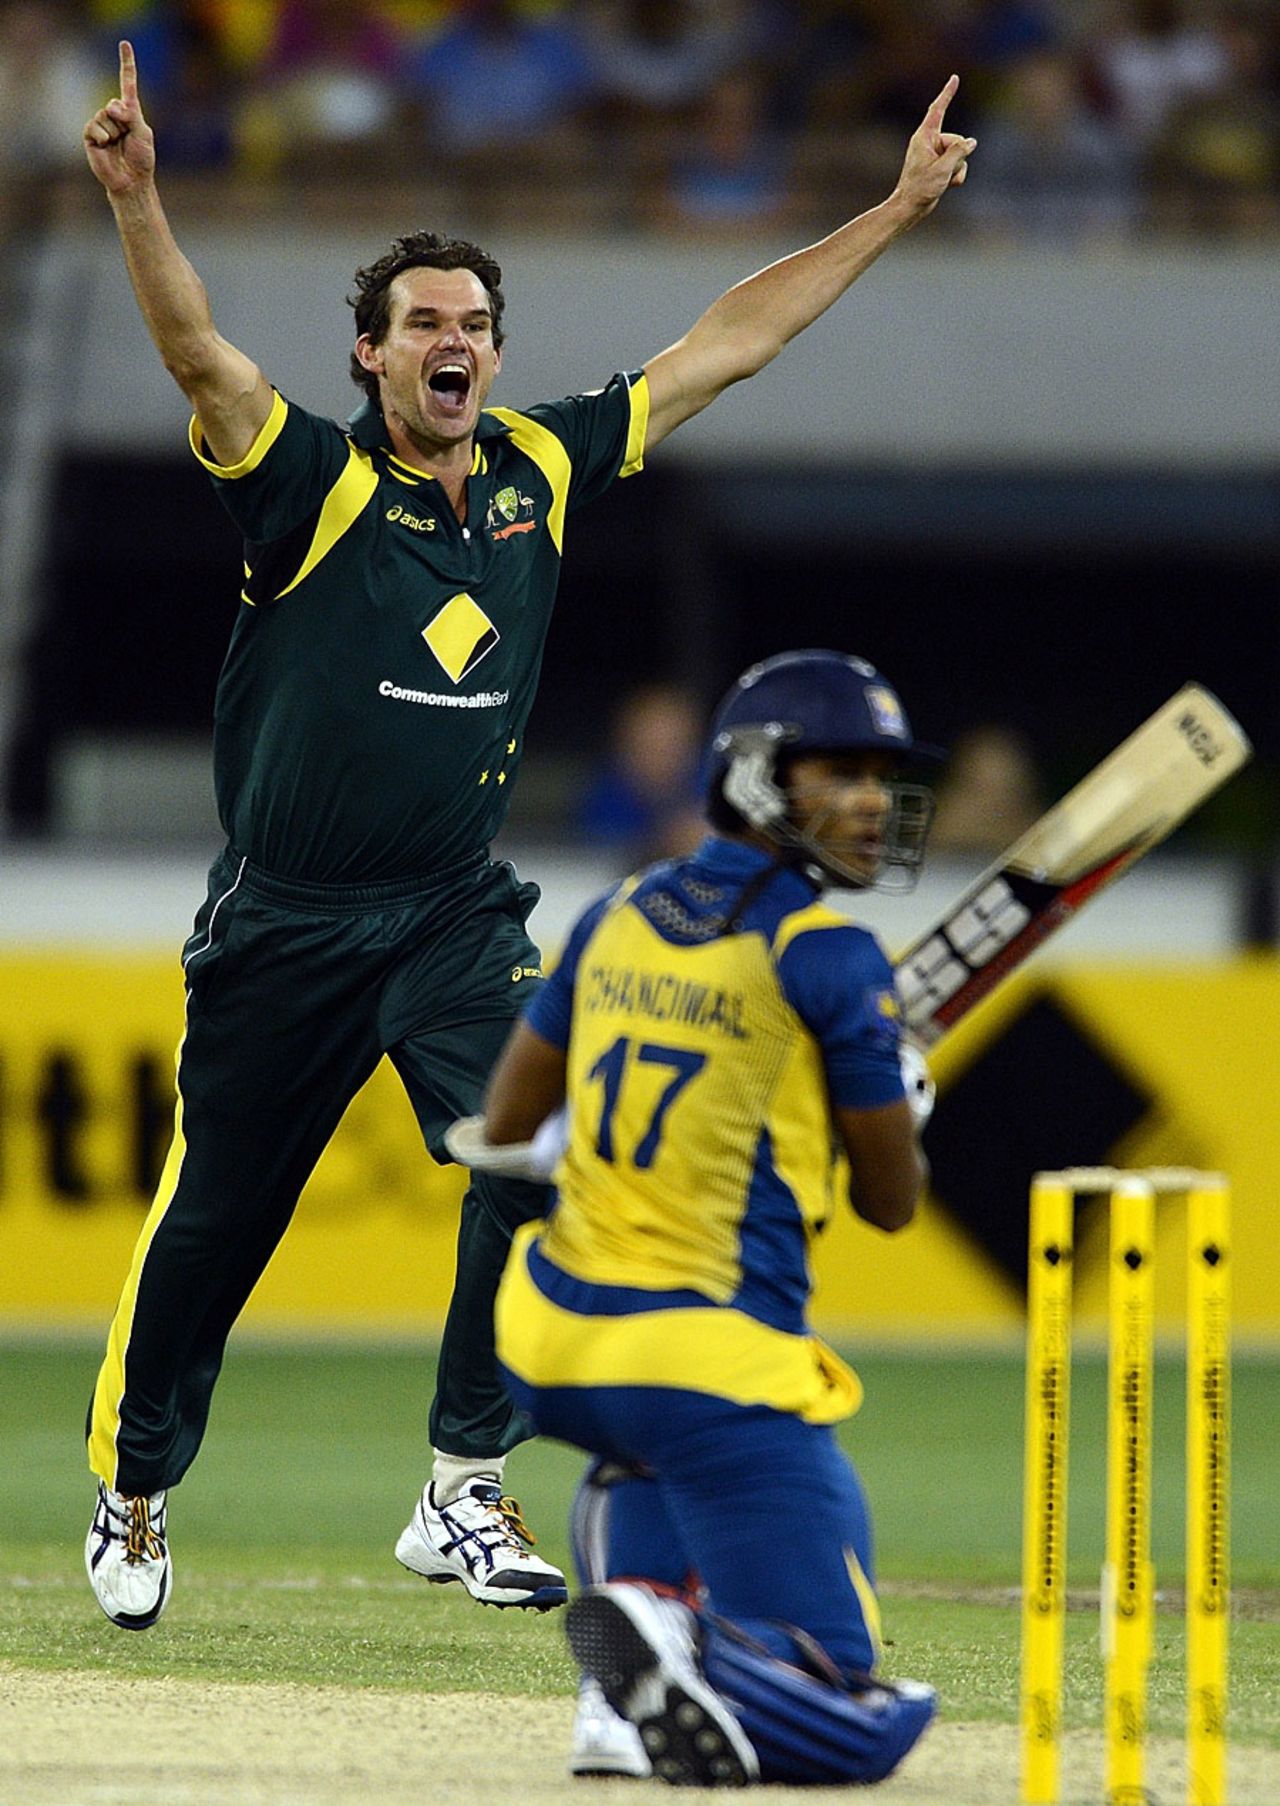 Clint McKay reacts after an acrobatic catch by the wicketkeeper to dismiss Dinesh Chandimal, Australia v Sri Lanka, 1st ODI, Melbourne, January 11, 2013